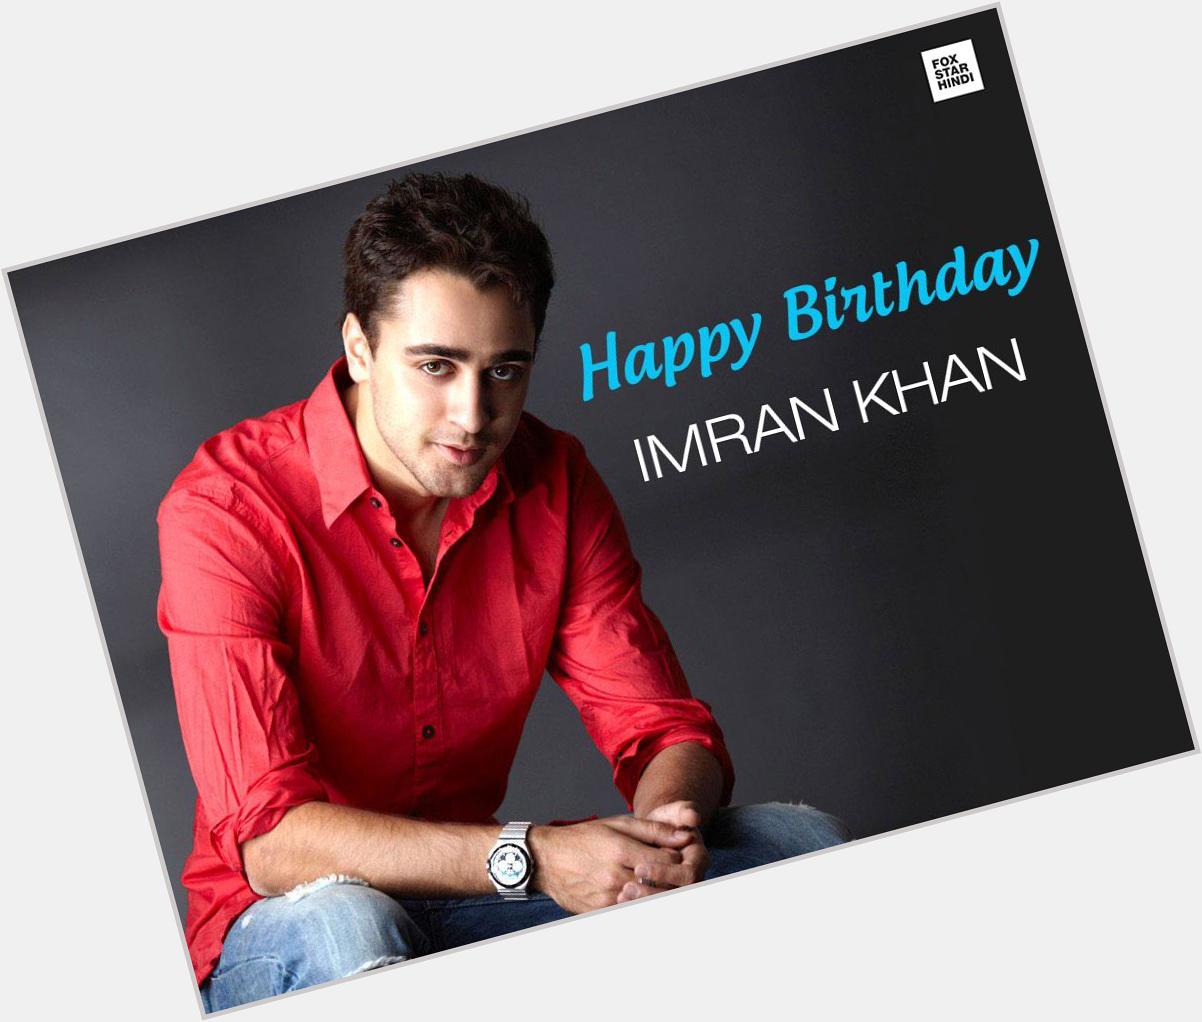 Wishing a very Happy Birthday to the charming, Imran Khan.
Which is your favourite movie of him? 